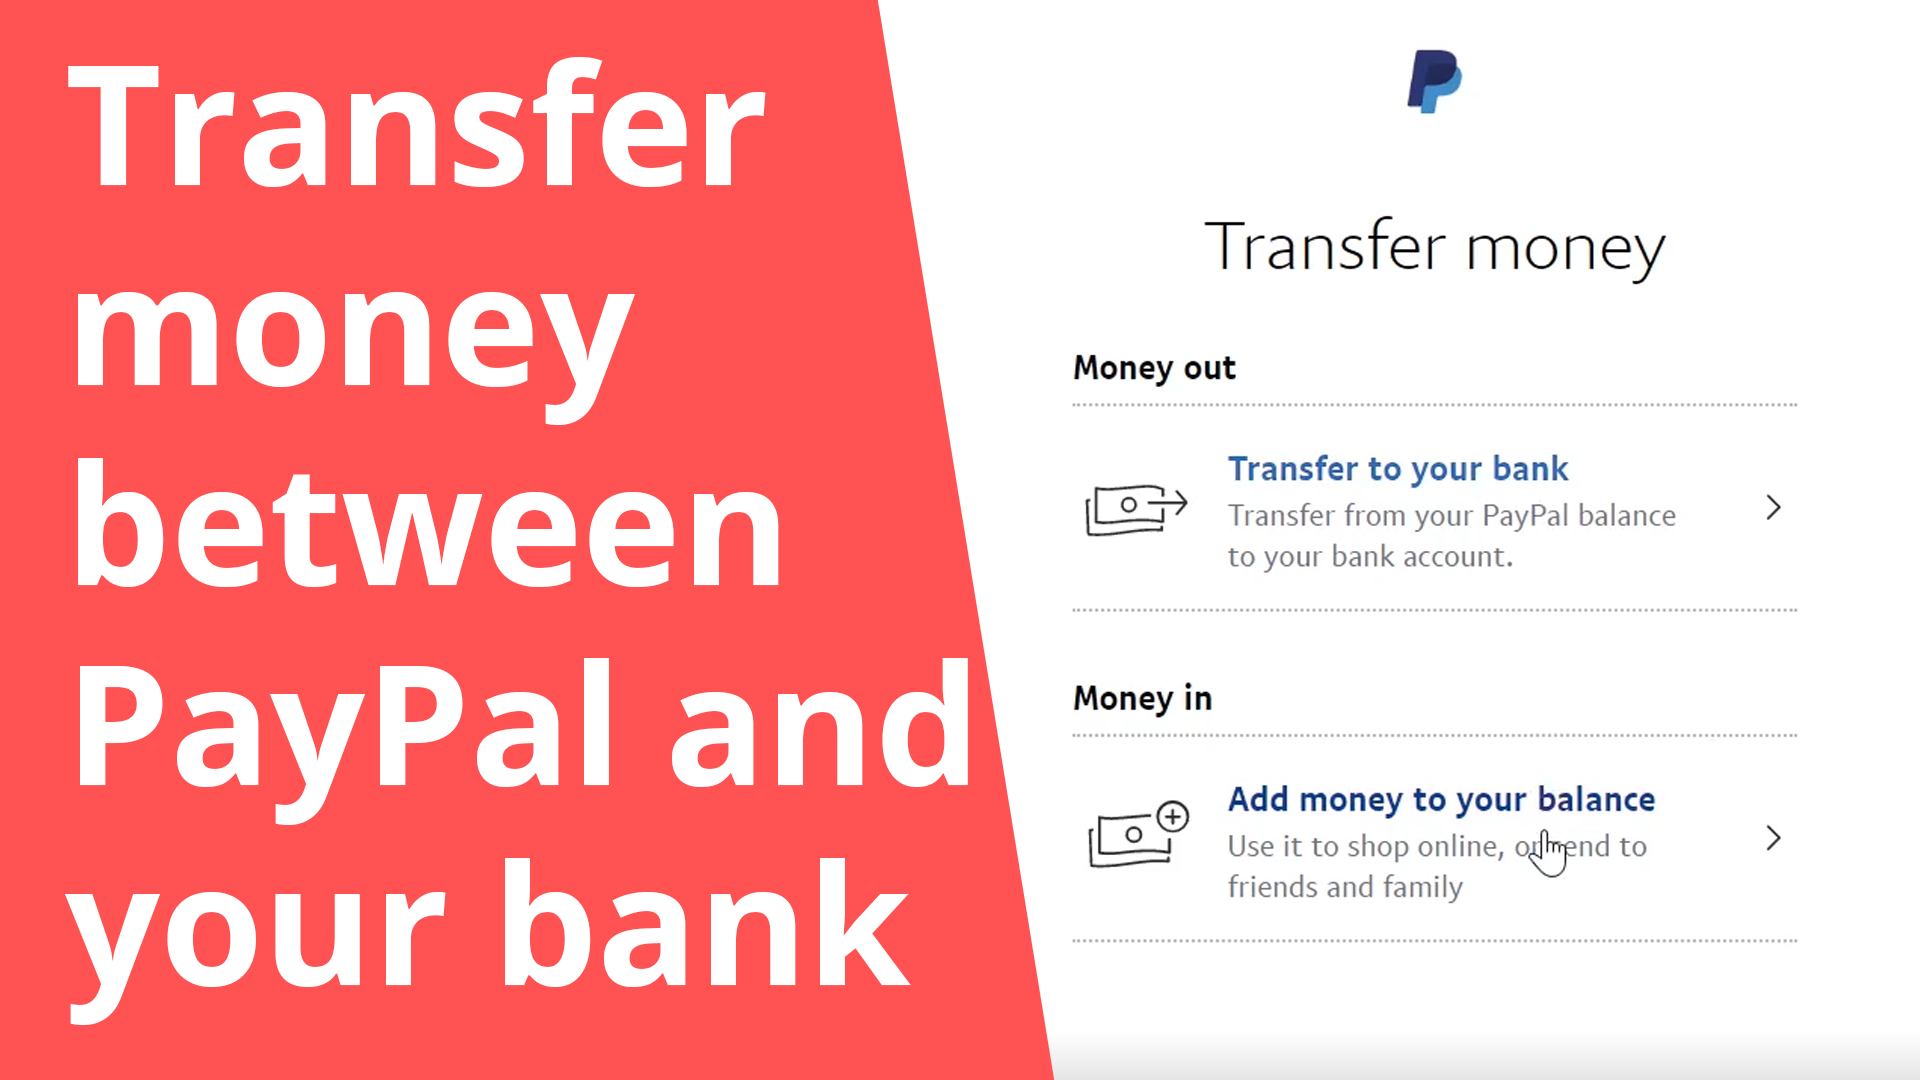 Transfer money between PayPal and your bank account